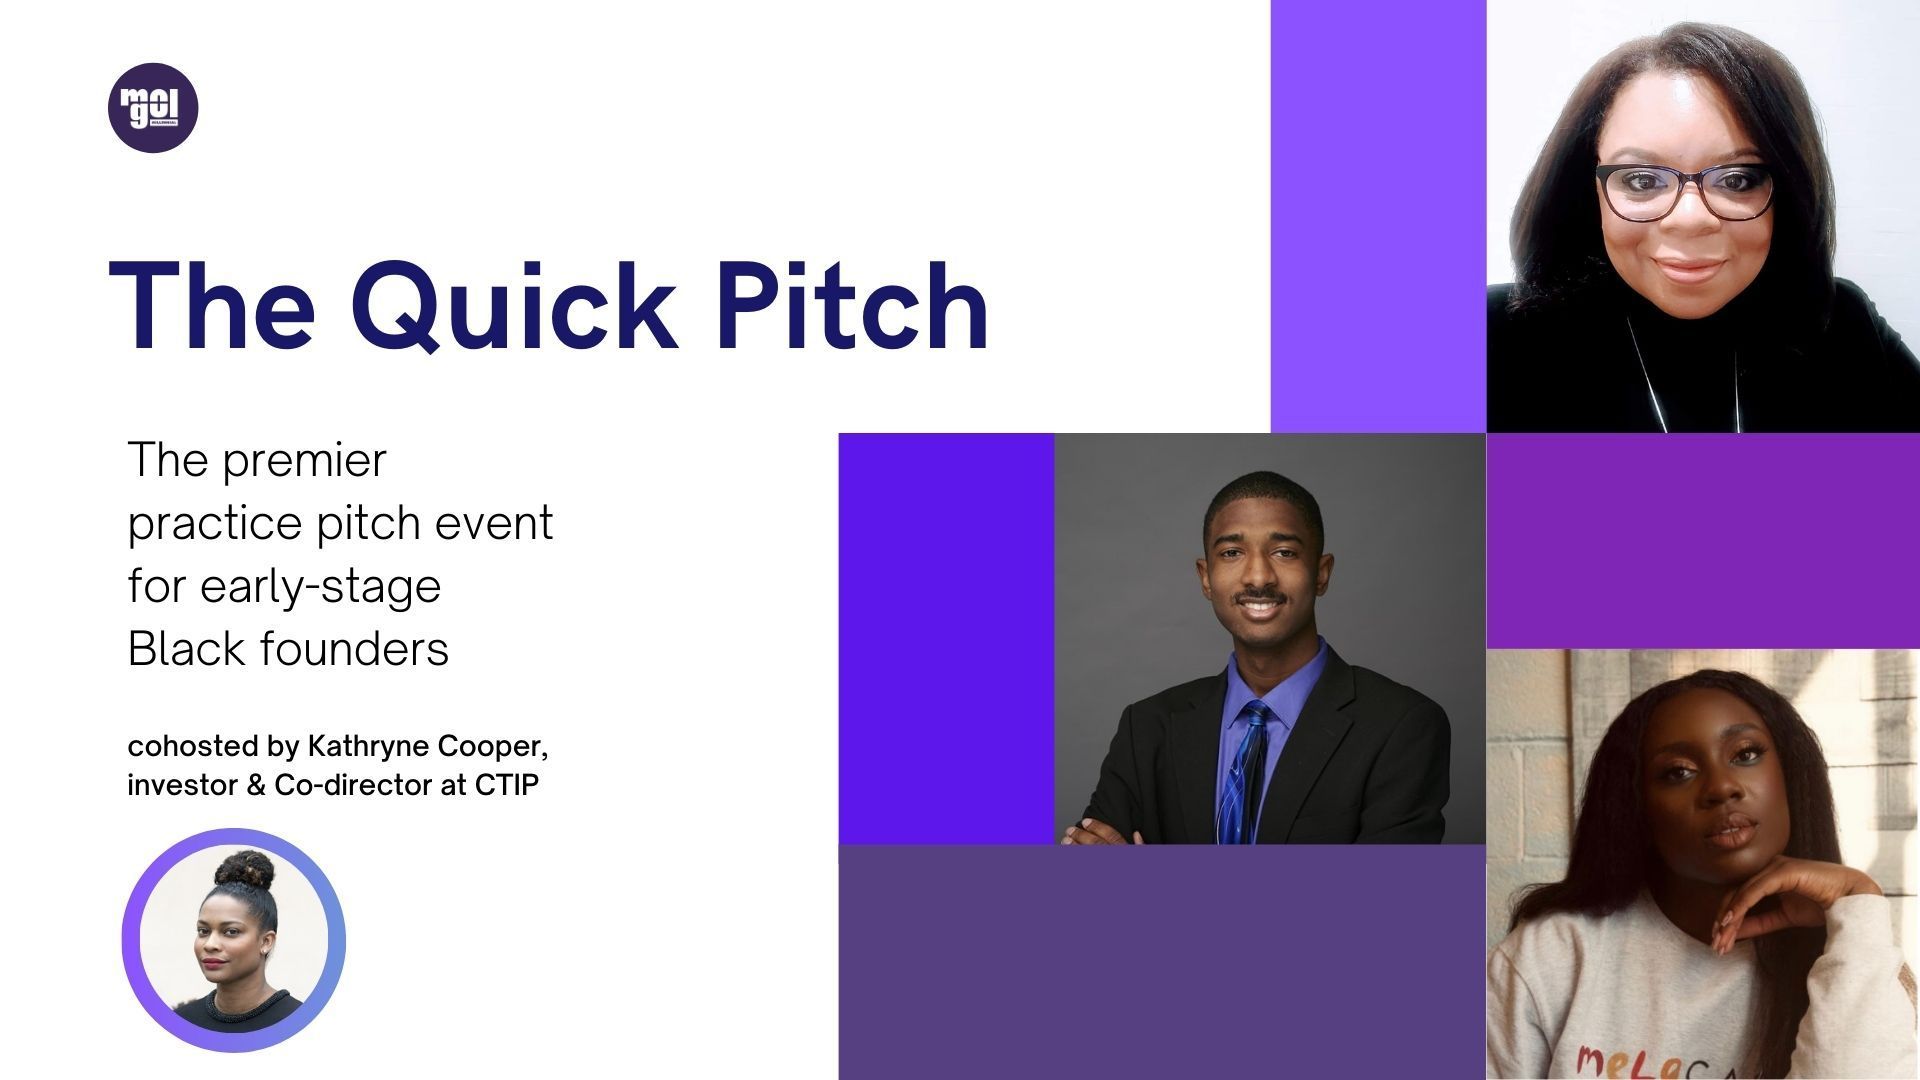 [Watch] Black founders practice their pitch with Kathryne Cooper of CTIP